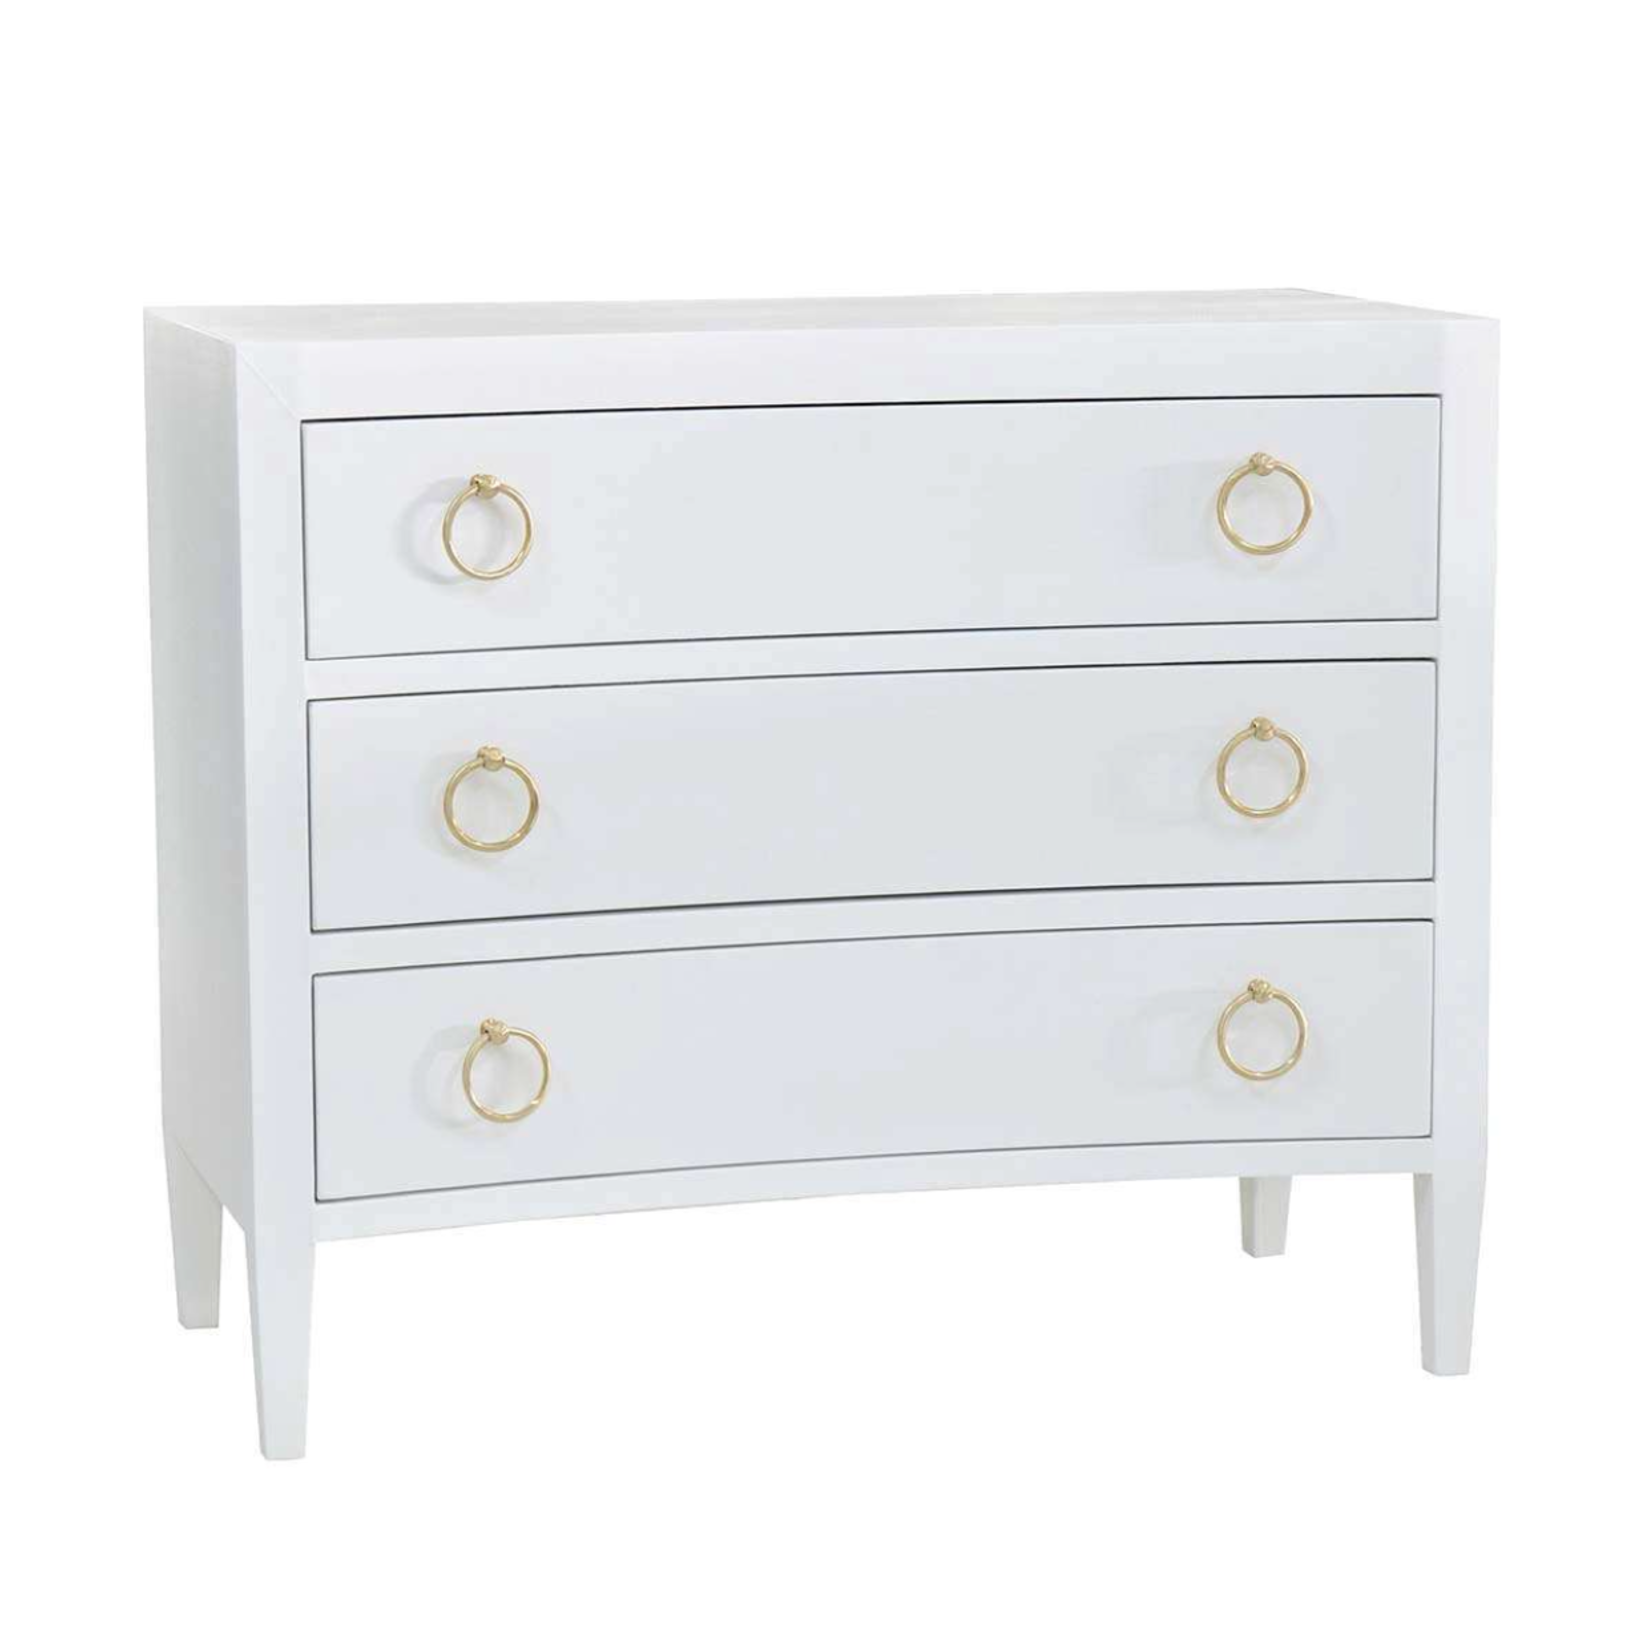 Outside The Box 42x20x36 Morning White Linen Wrapped Mahogany 3 Drawer Dresser